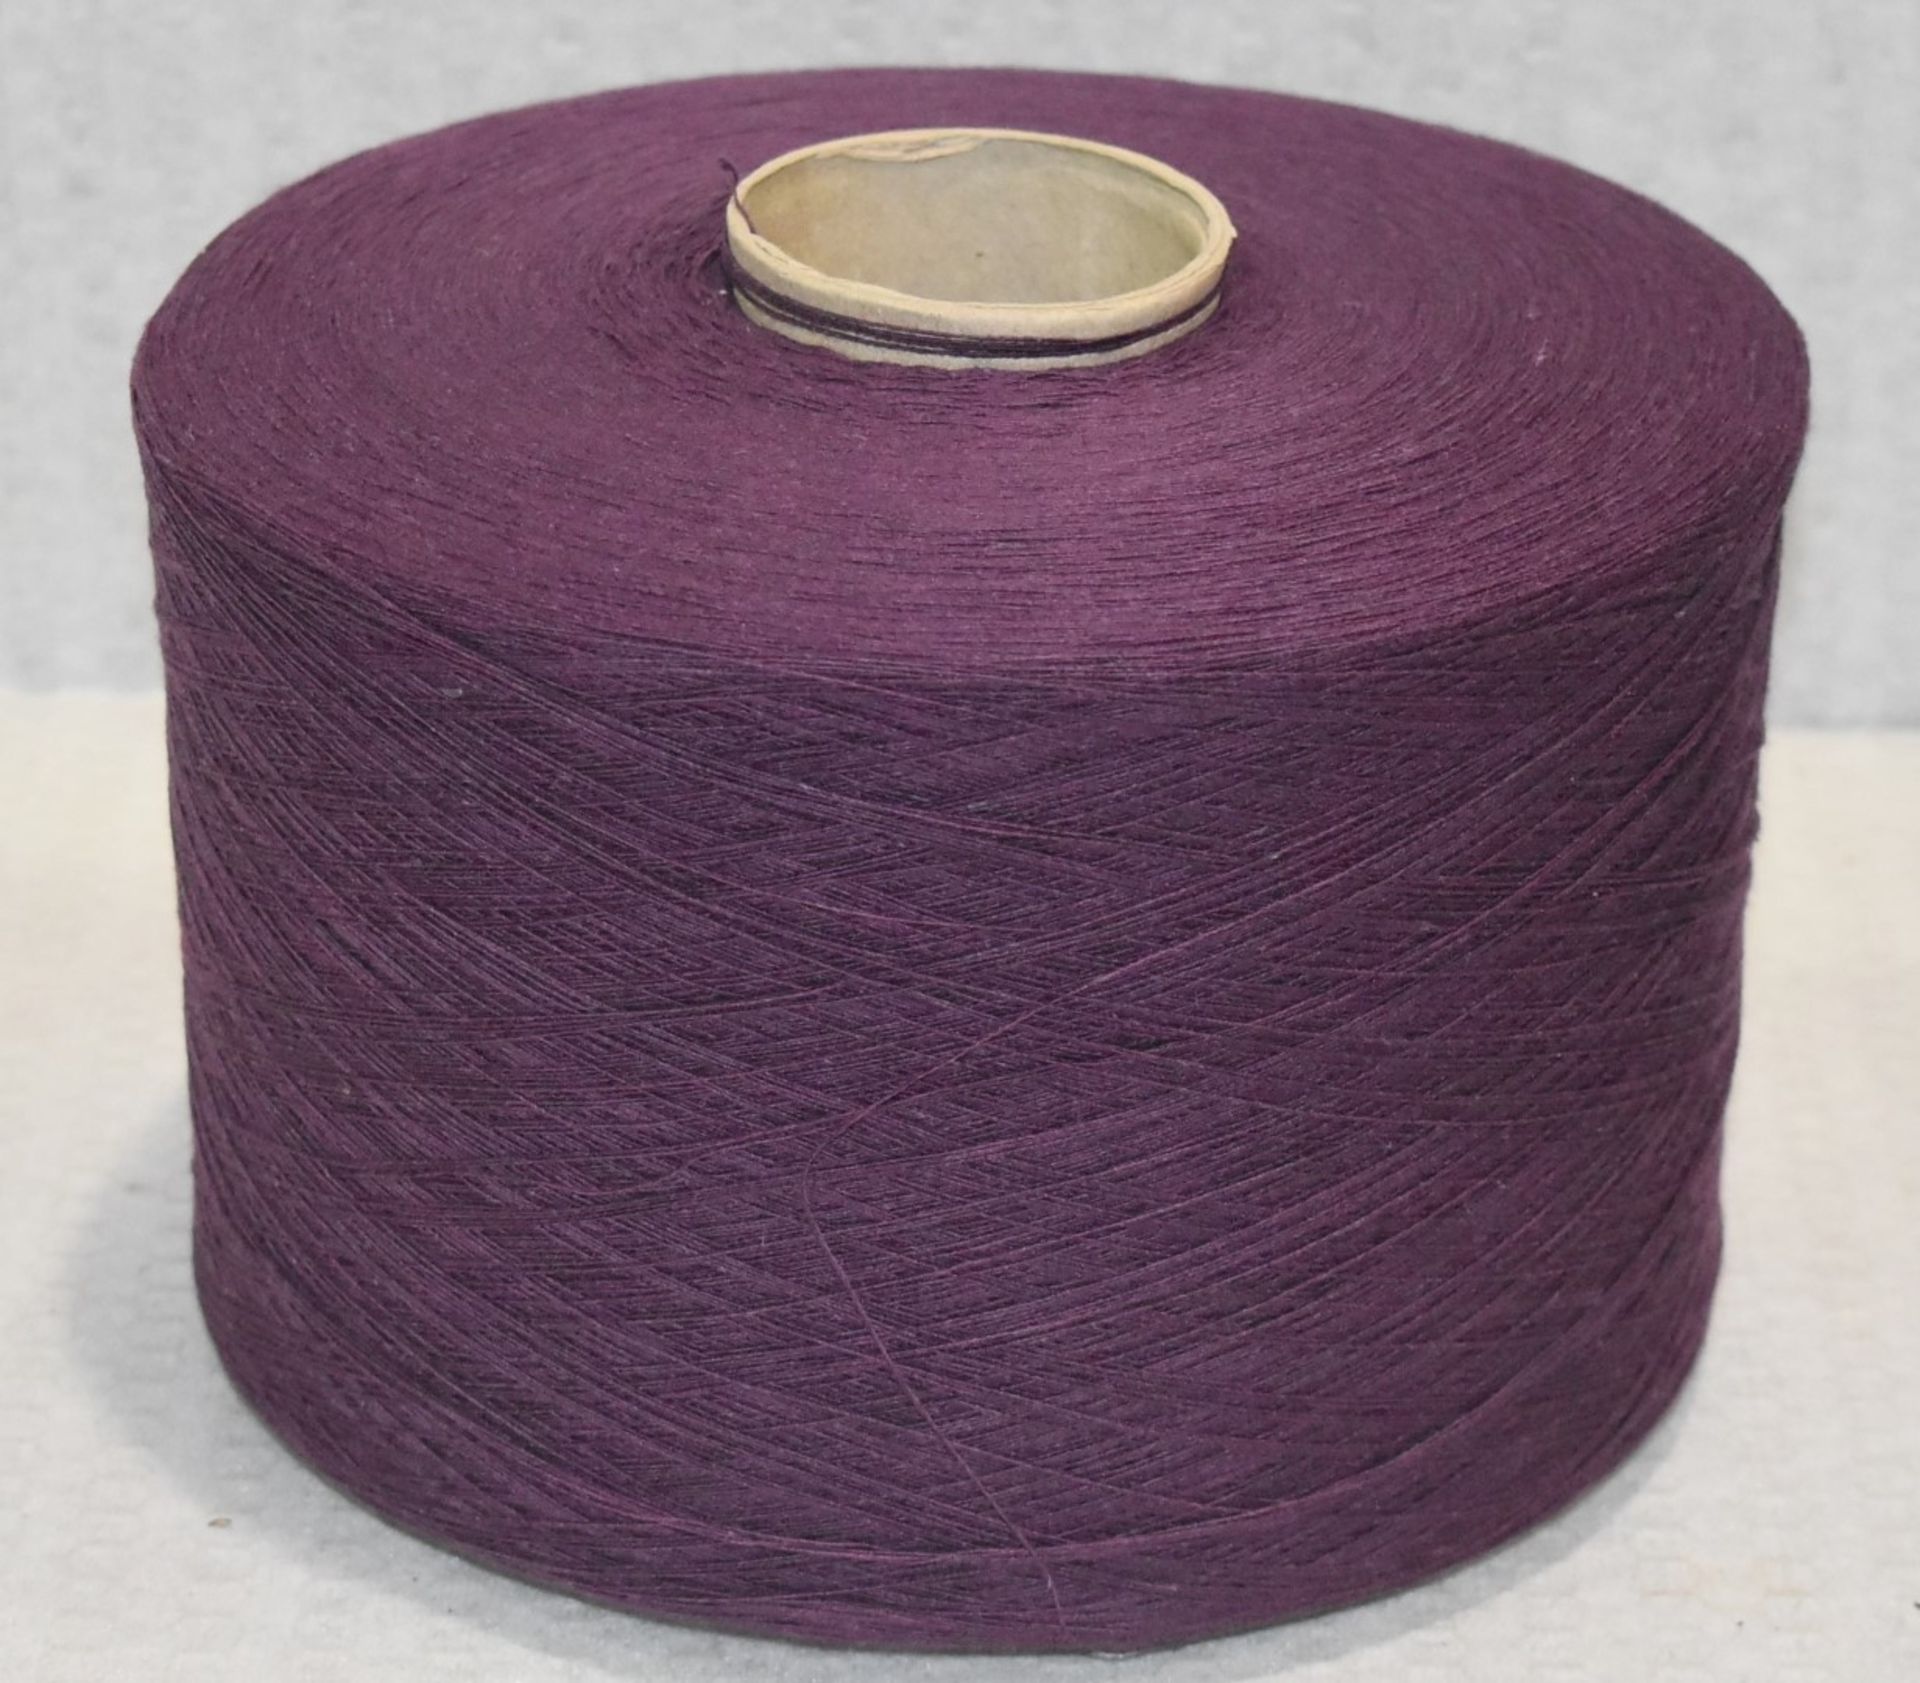 12 x Cones of 1/13 MicroCotton Knitting Yarn - Purple - Approx Weight: 2,300g - New Stock ABL Yarn - Image 2 of 9